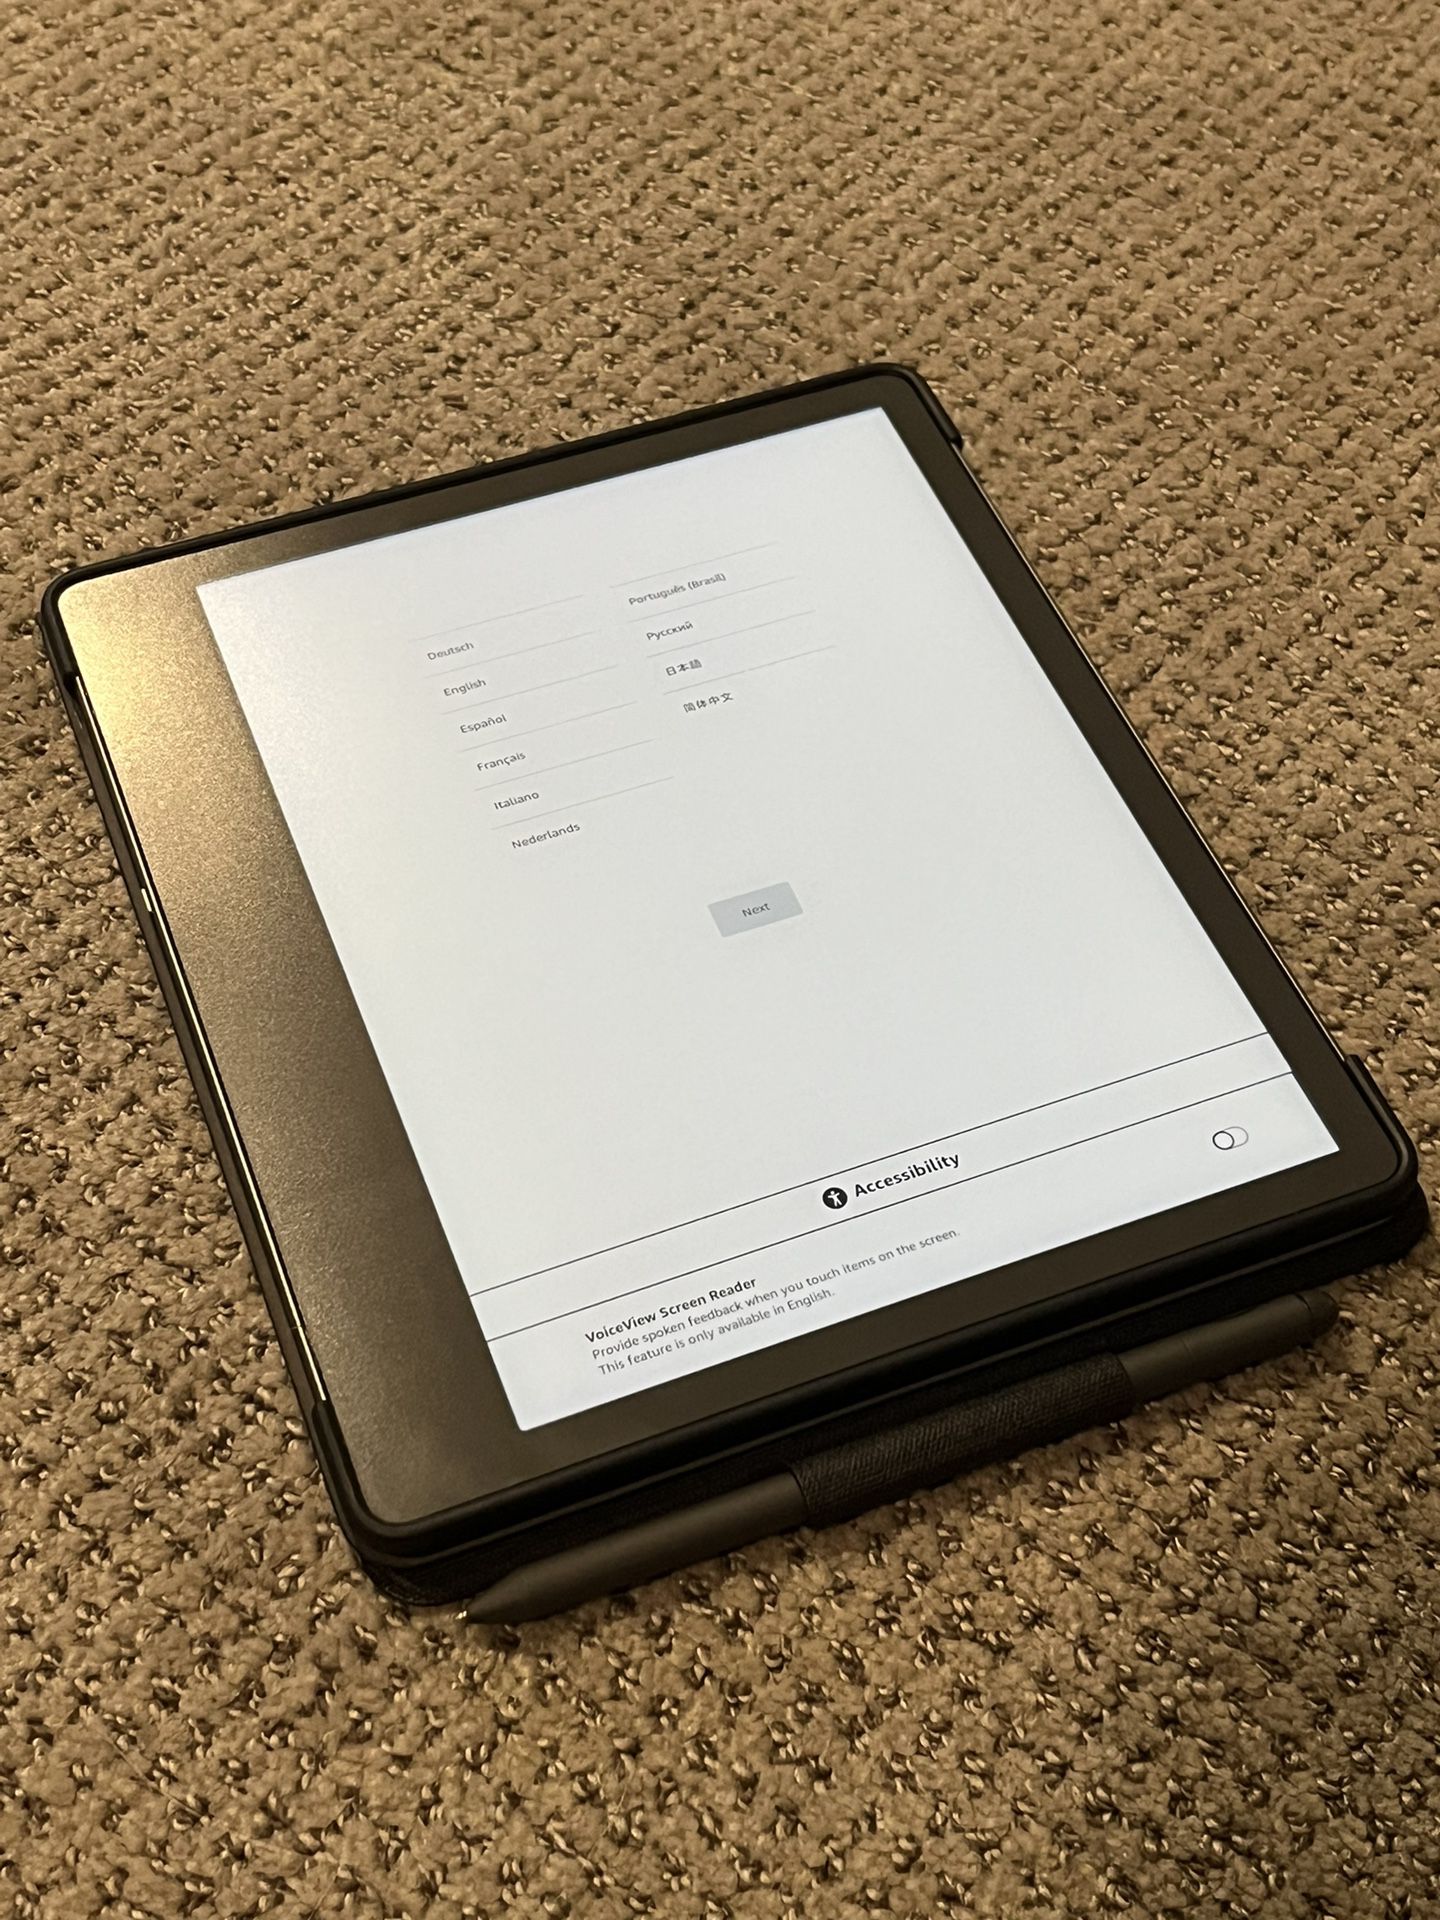 Kindle Scribe 32gb w/ Premium Pen and Leather Case